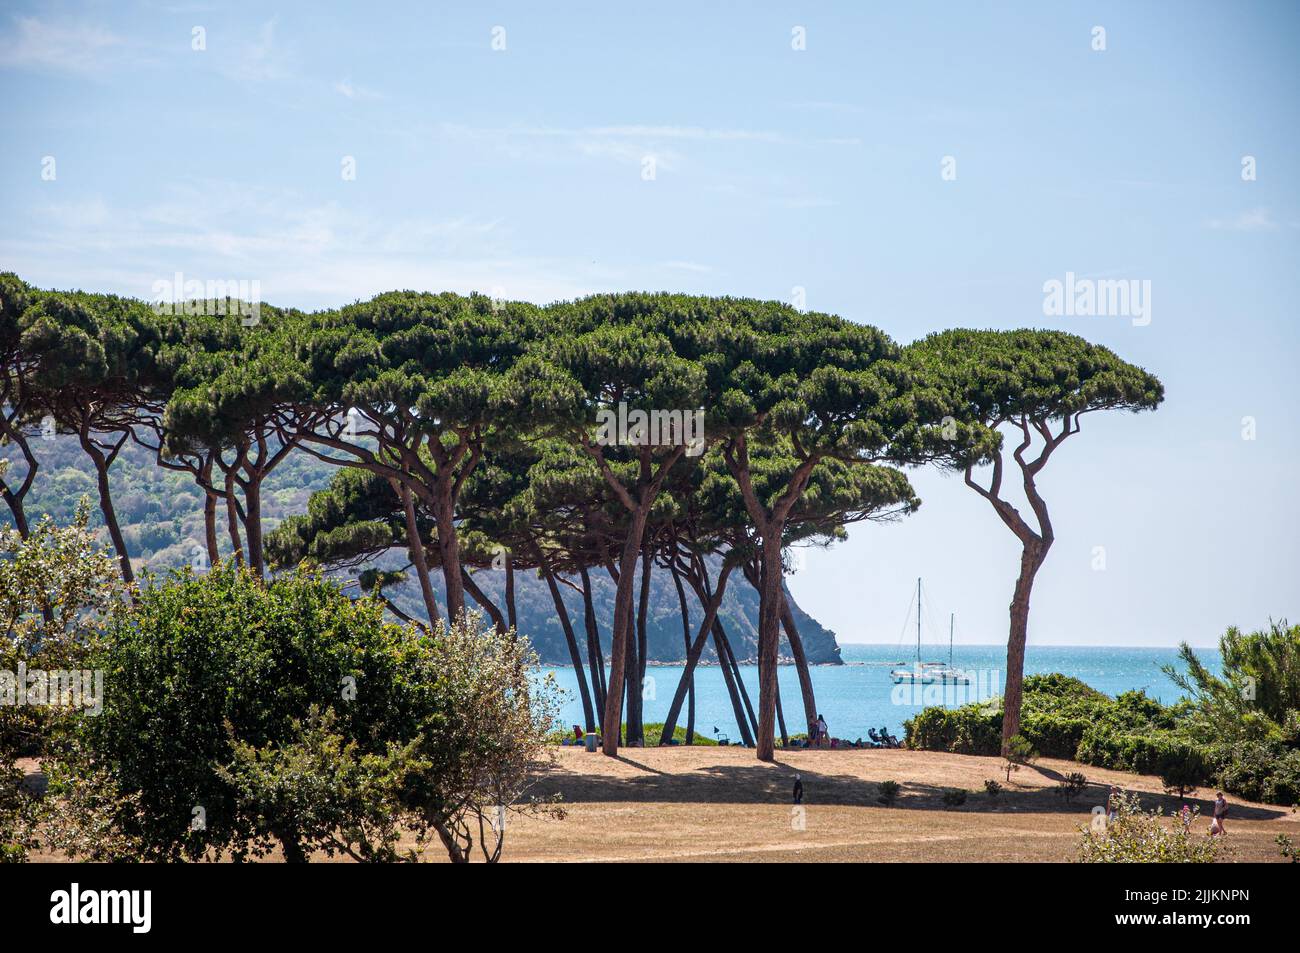 A view of Gulf of Baratti and pine trees Stock Photo